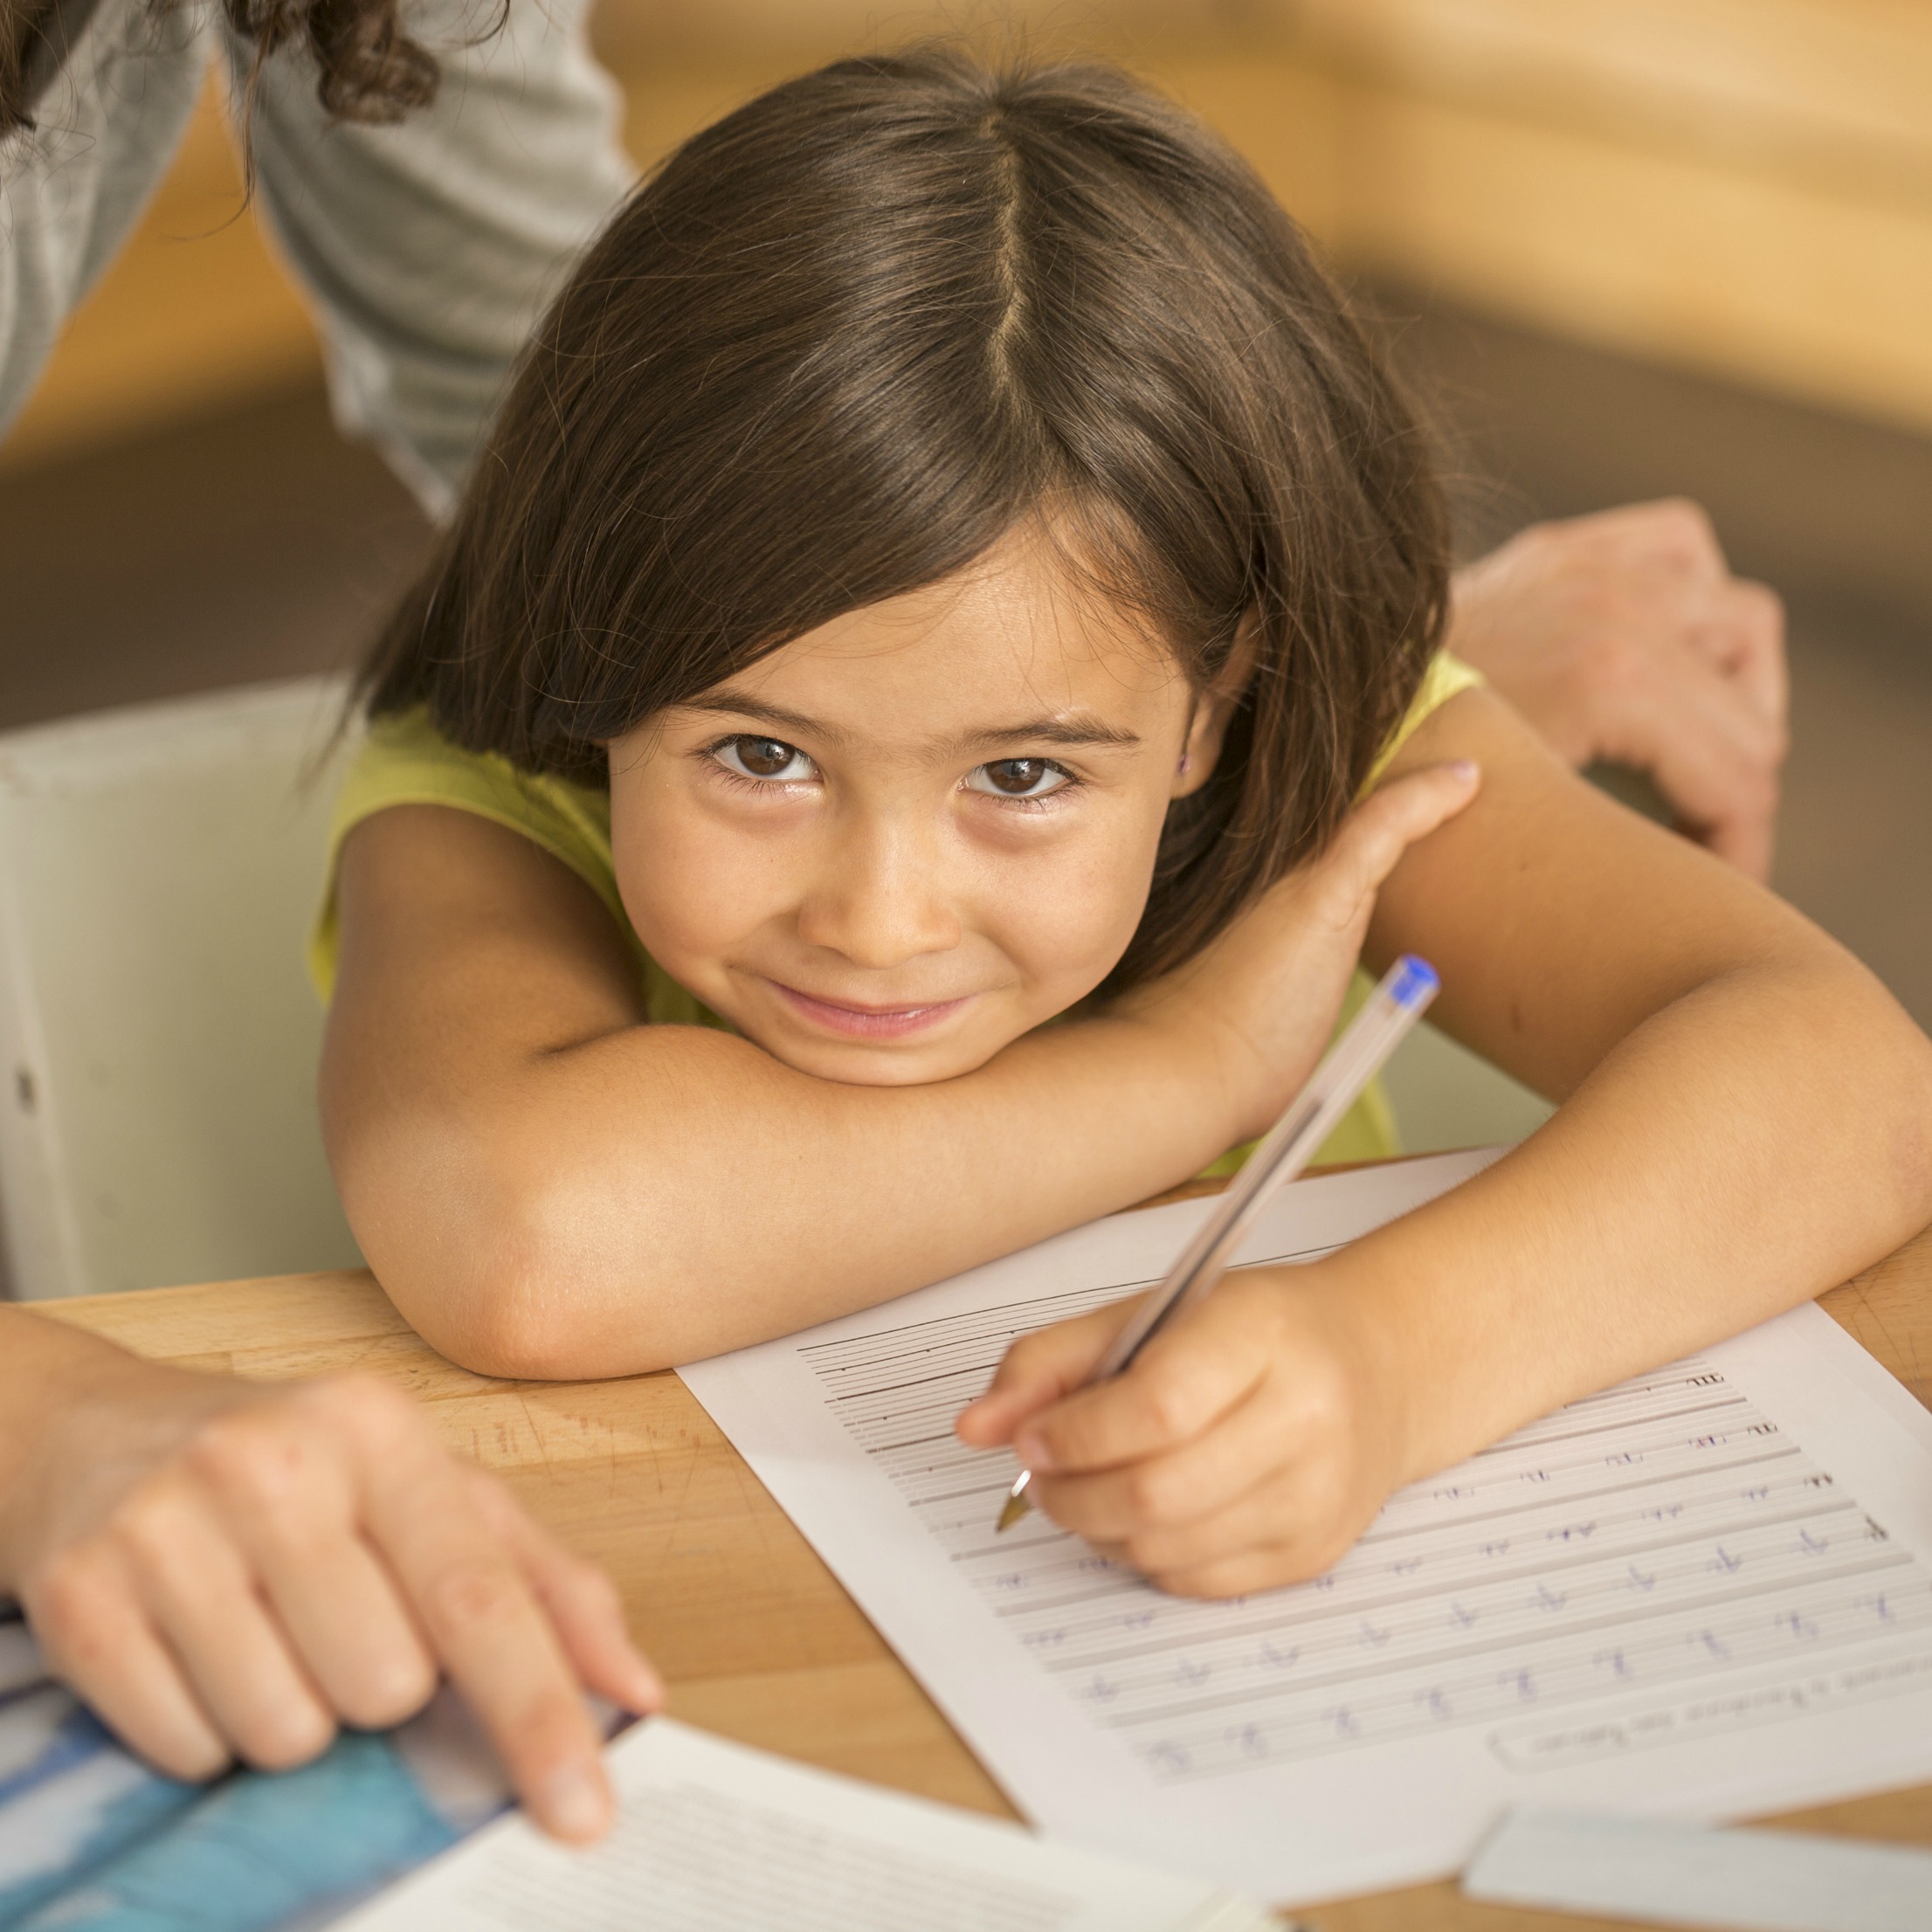 7 Essential Tips for Taming the Homework Monster